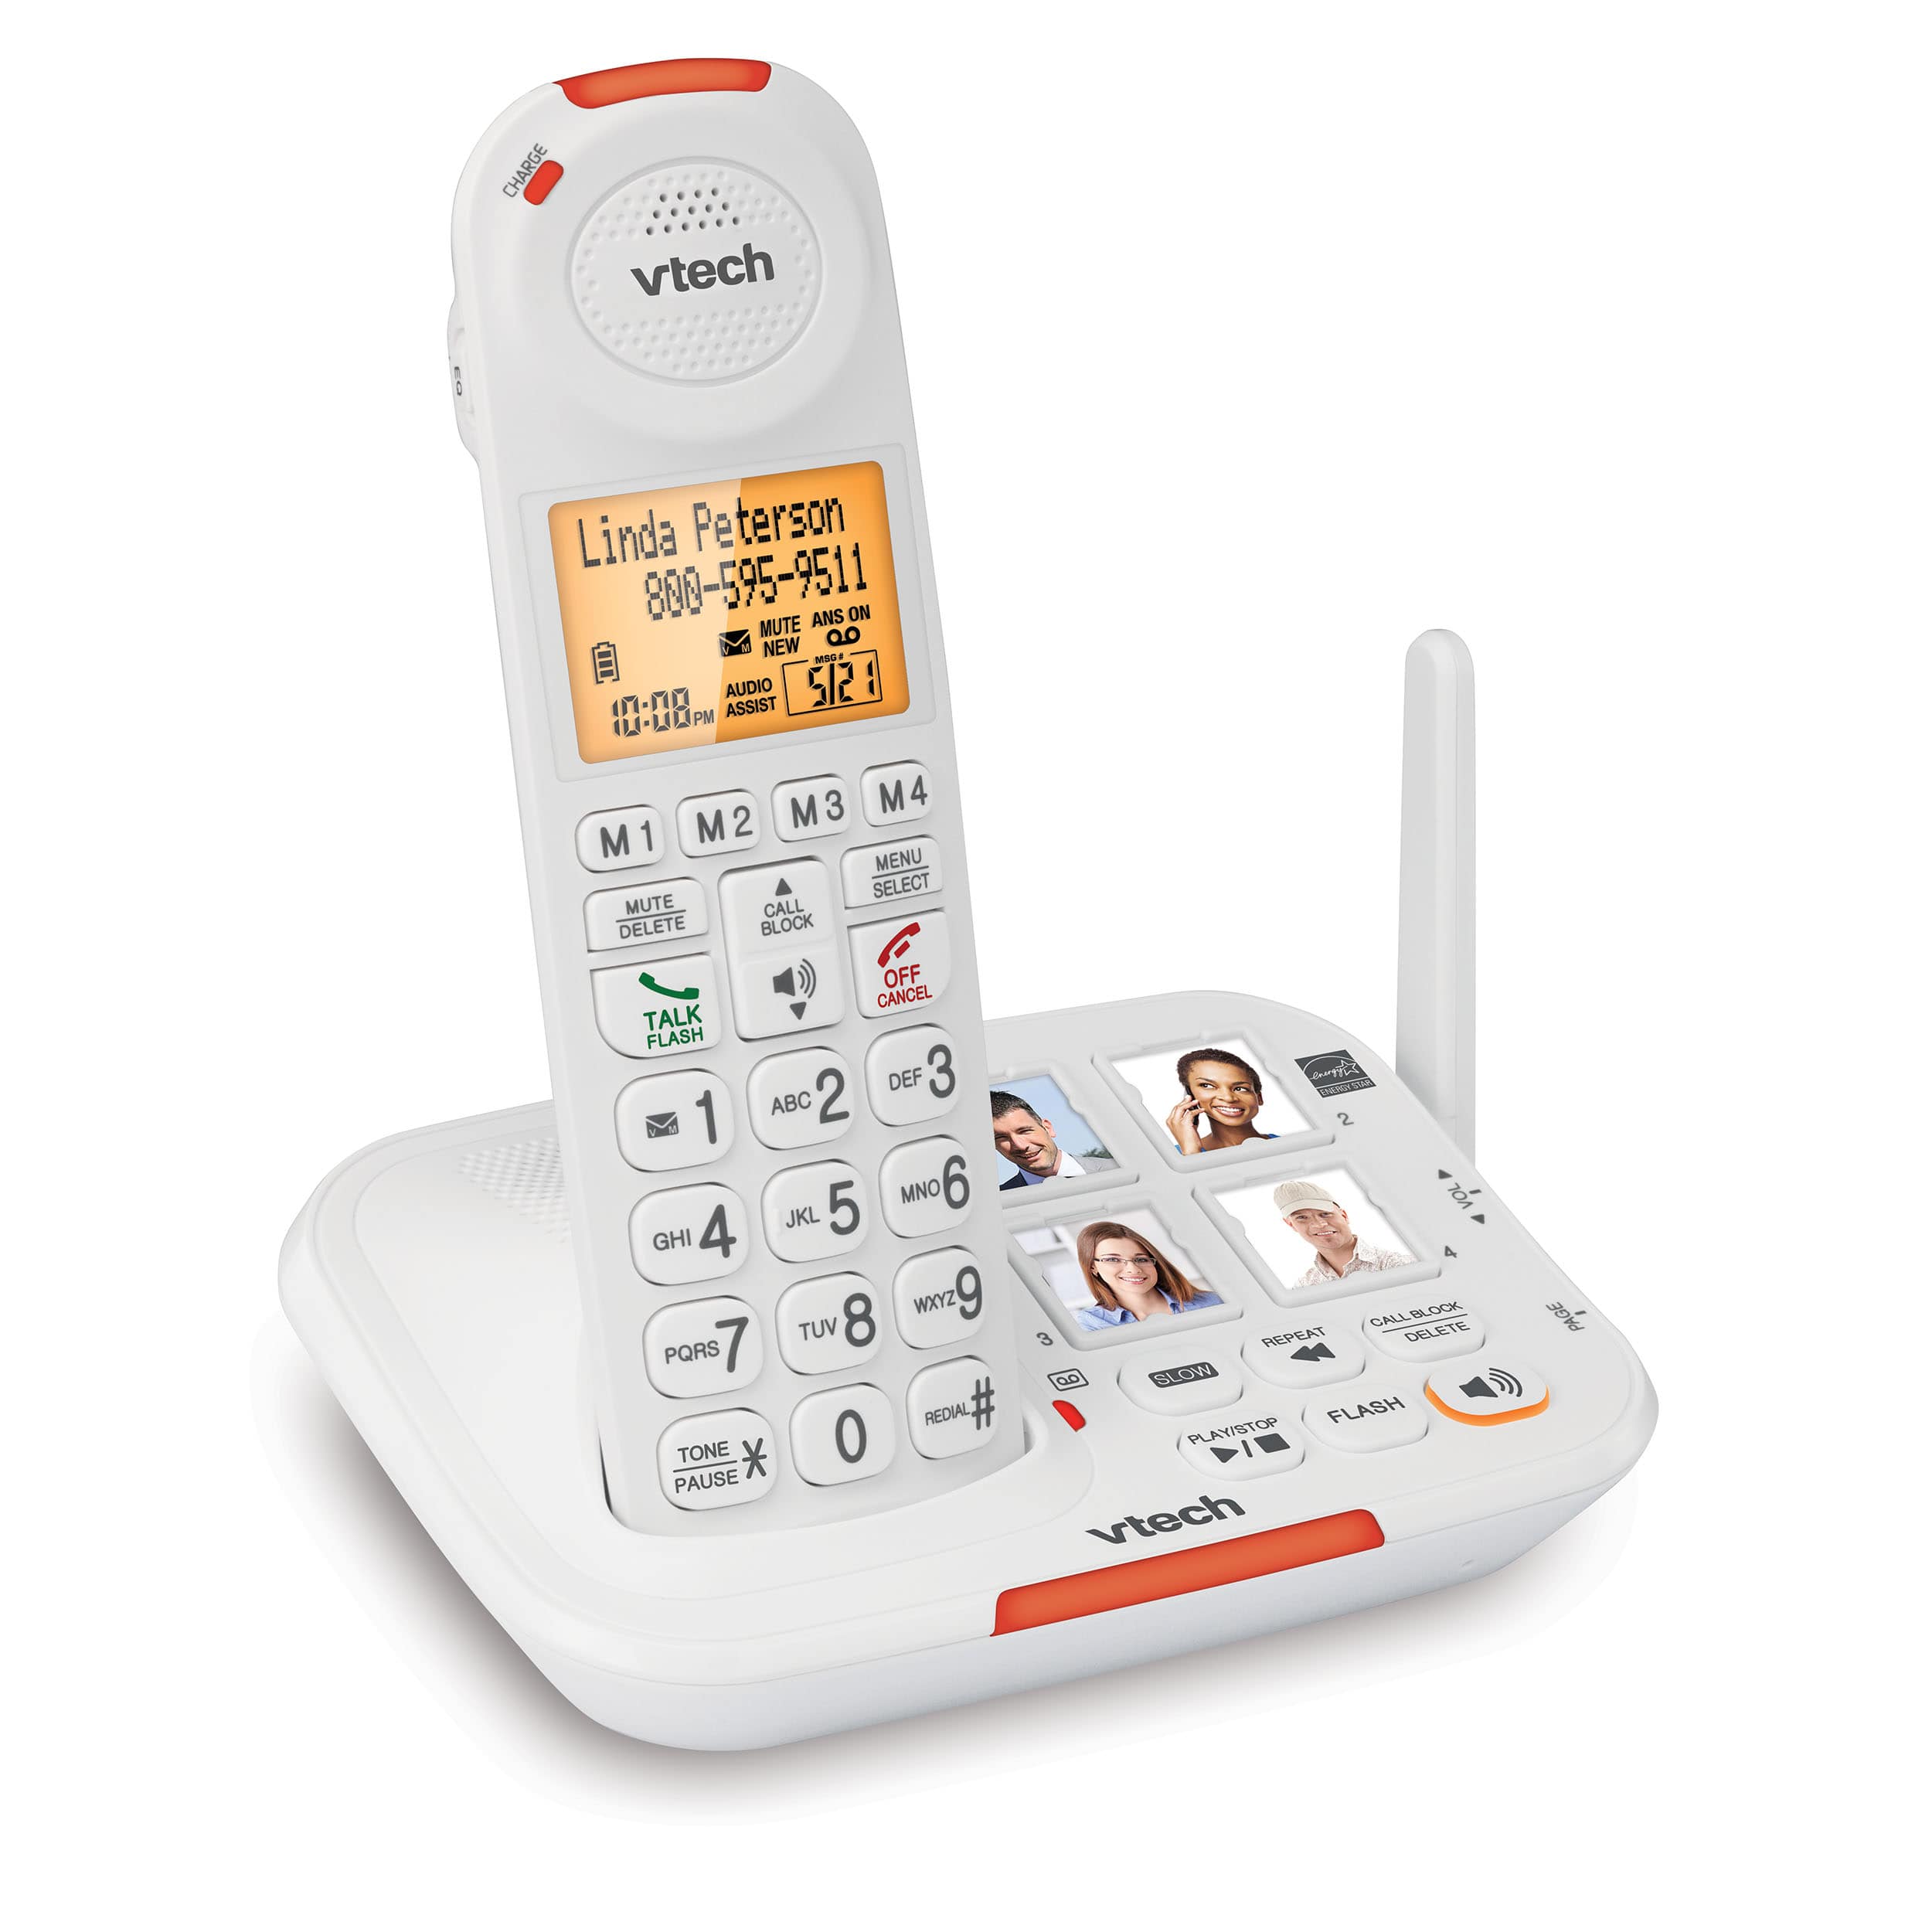 3 Handset Amplified Cordless Answering System with Big Buttons and Display - view 3